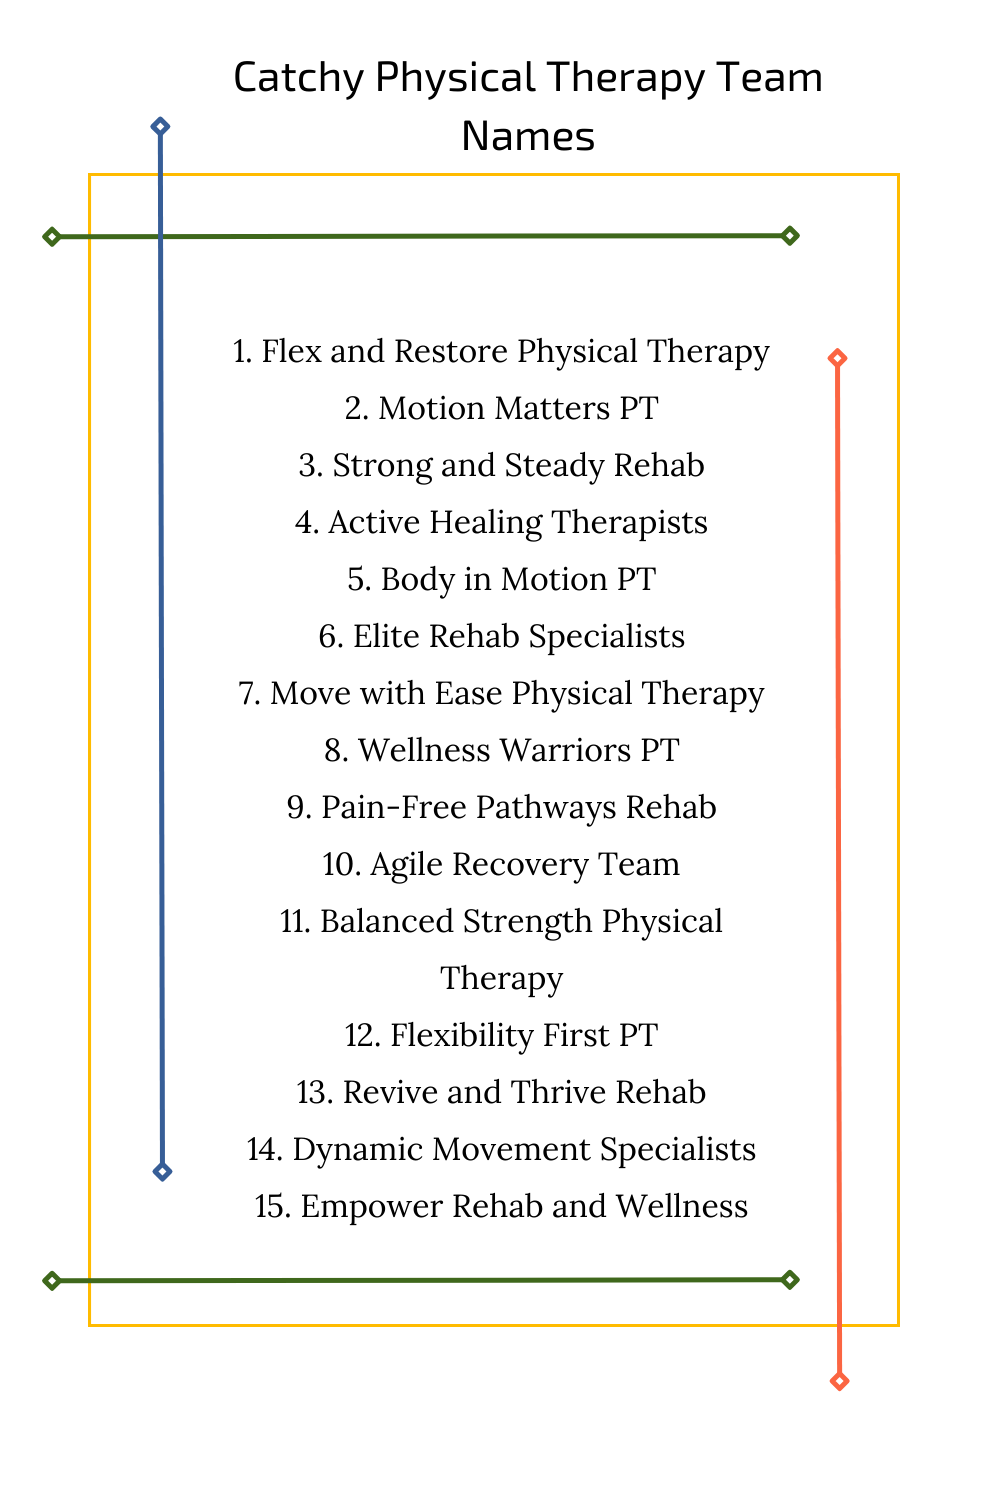 Catchy Physical Therapy Team Names